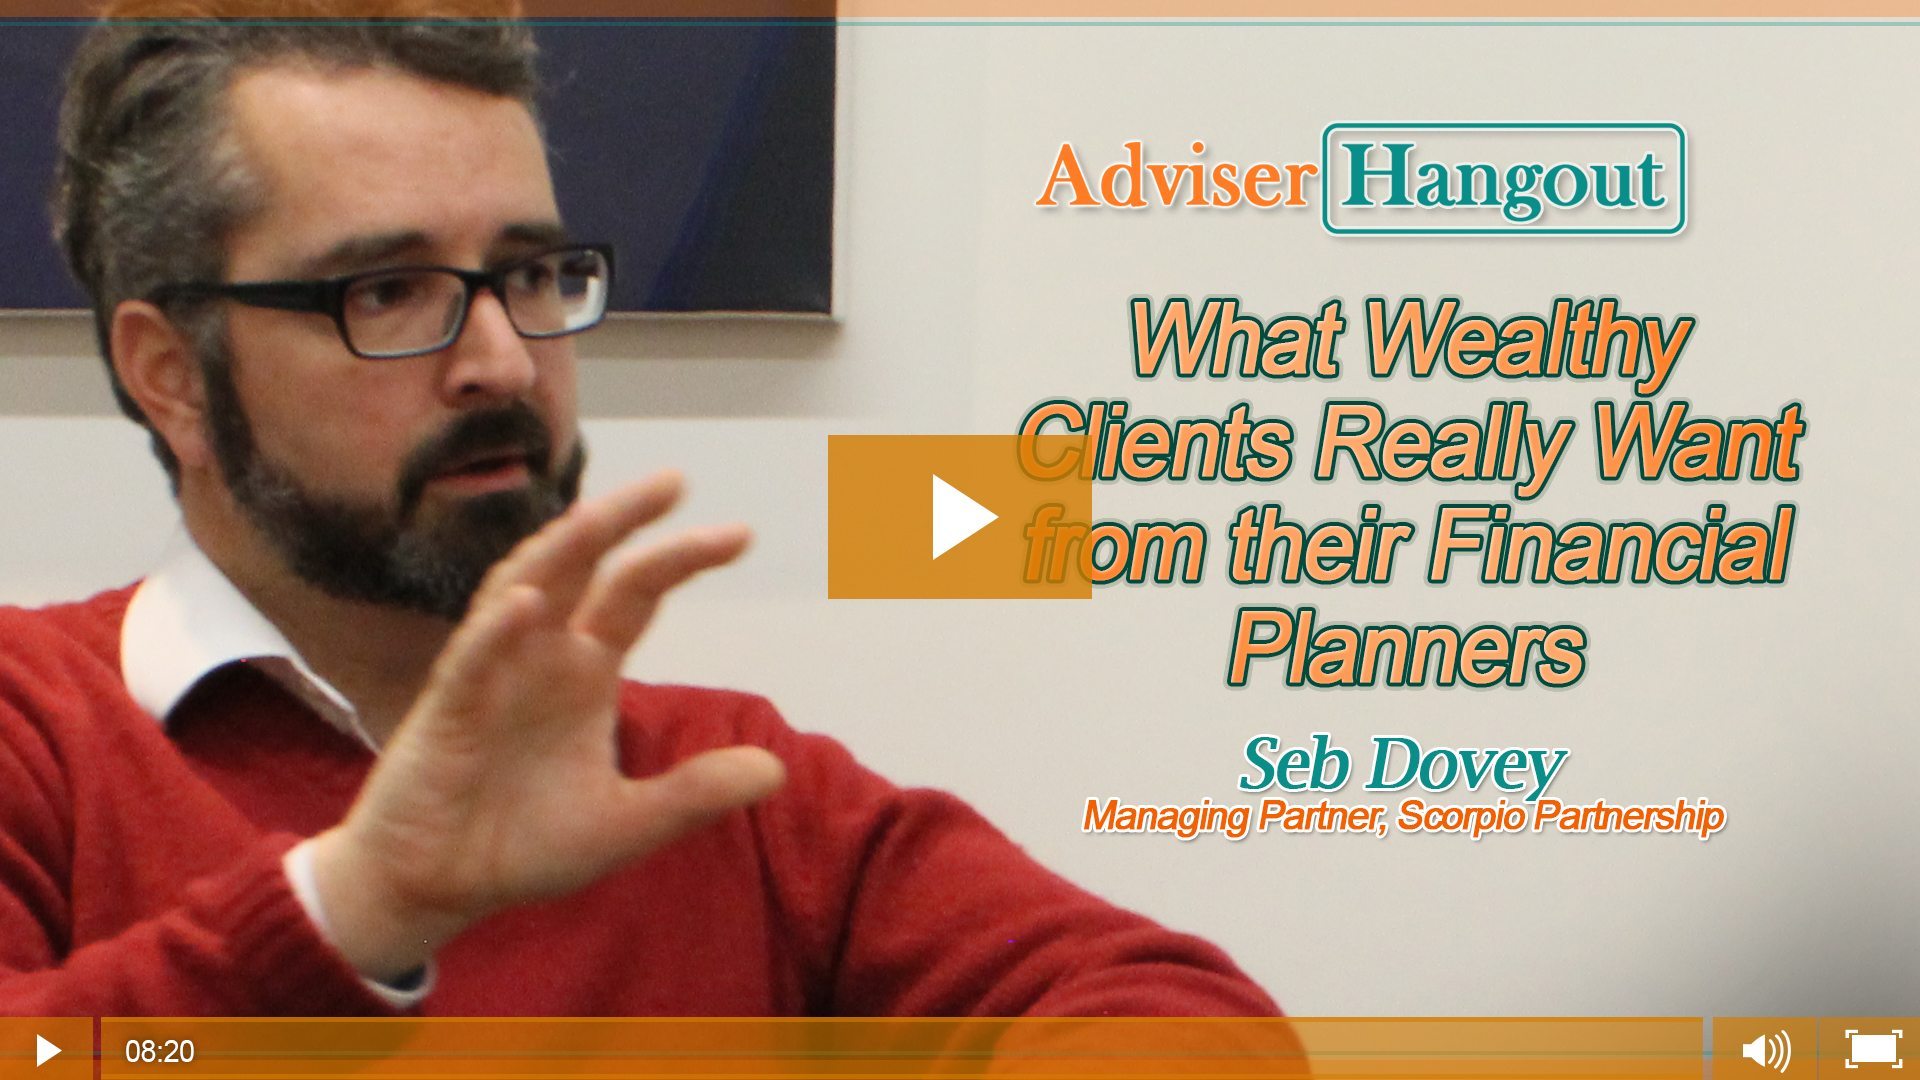 Seb Dovey: How the wealthy choose a financial planner